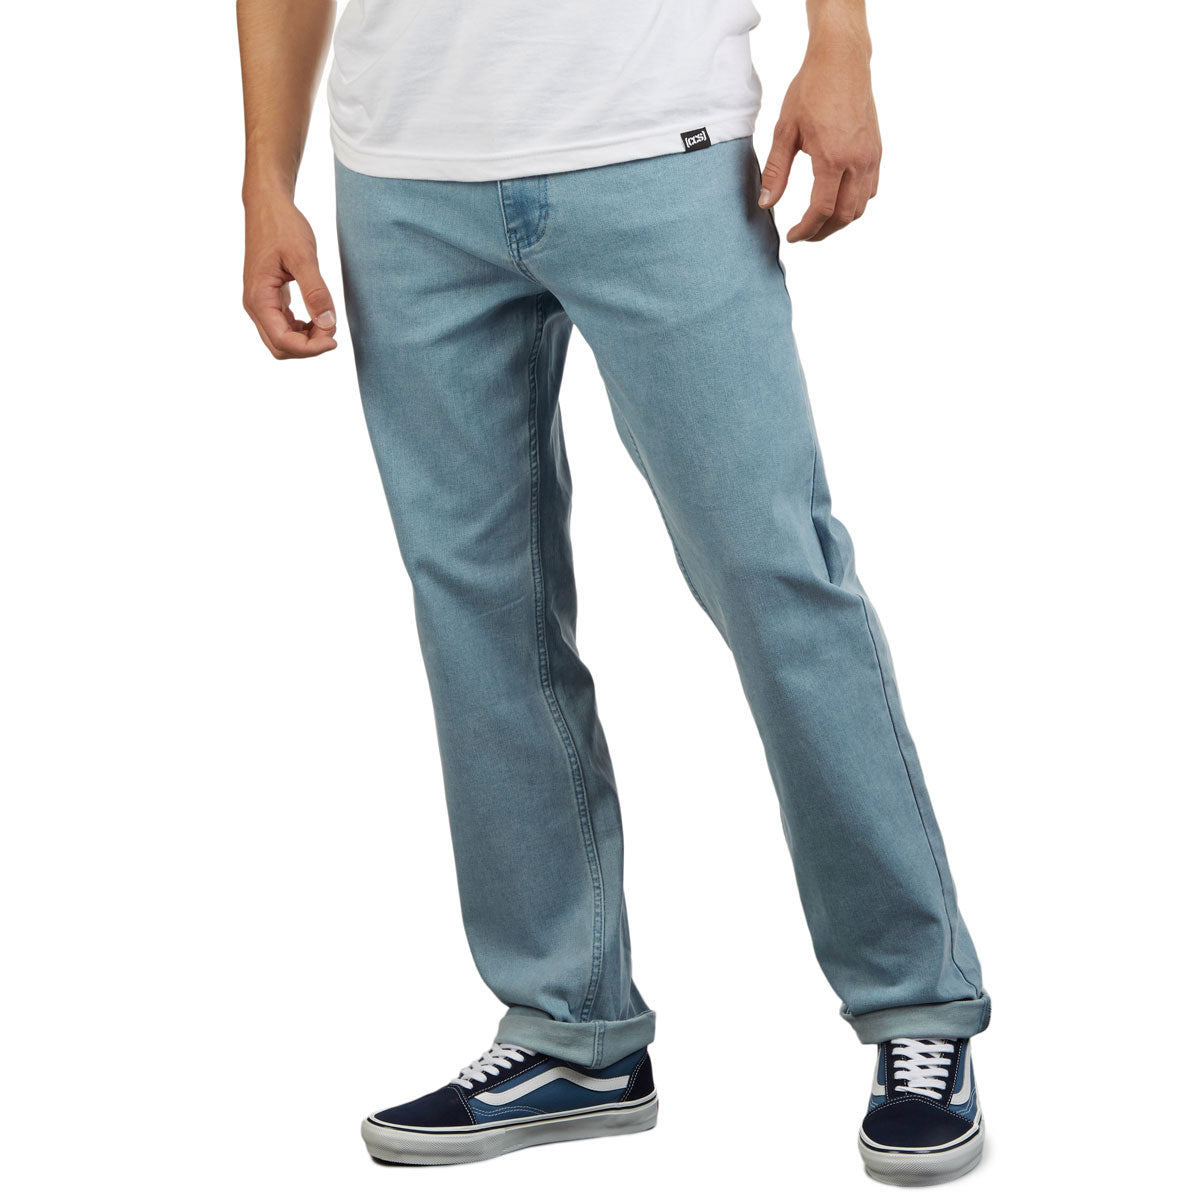 CCS Standard Plus Relaxed Denim Jeans - New Wash image 4